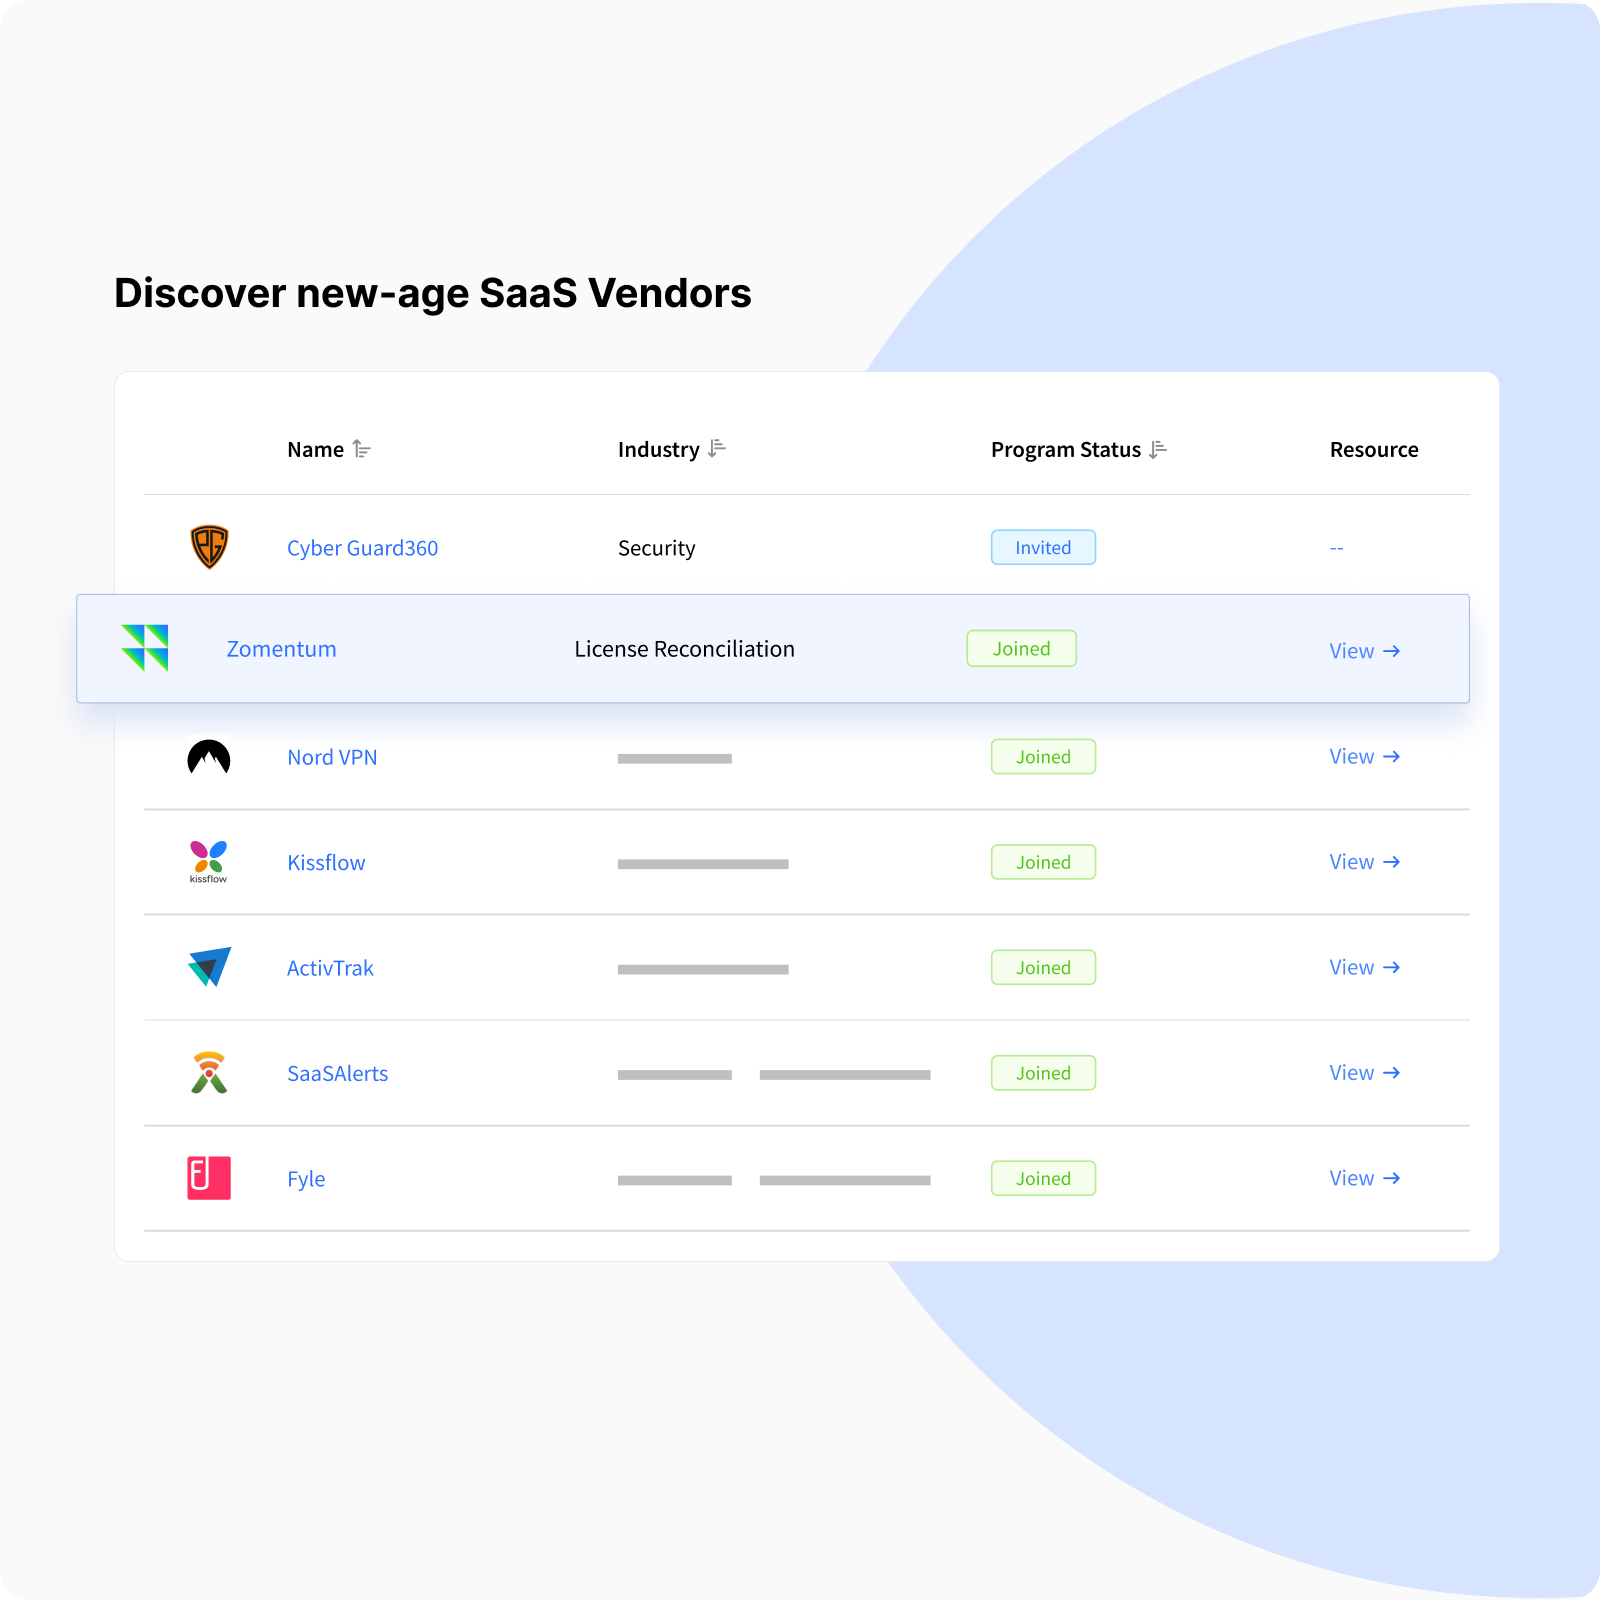 Discover new-age SaaS Vendors